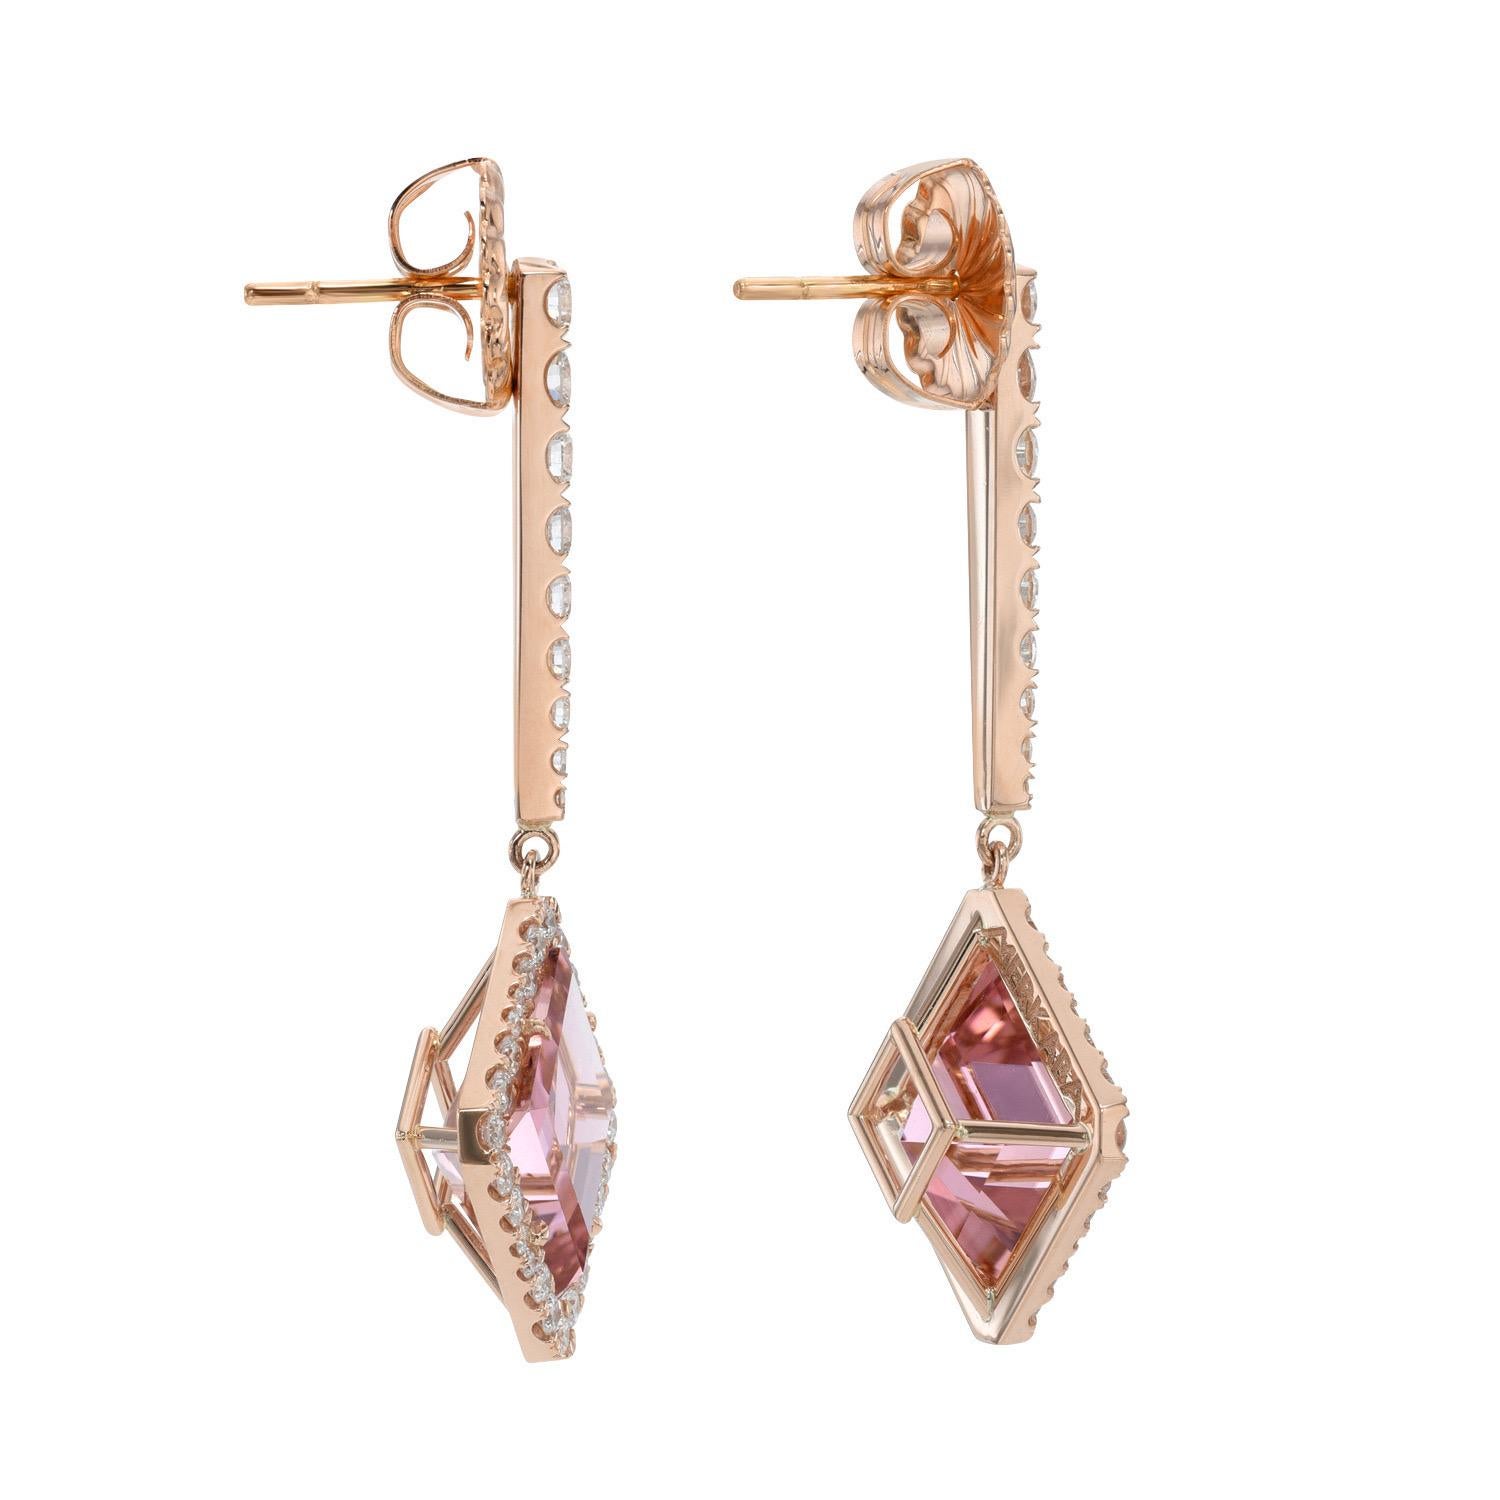 Contemporary Pink Tourmaline Earrings 7.67 Carat Kite Shapes